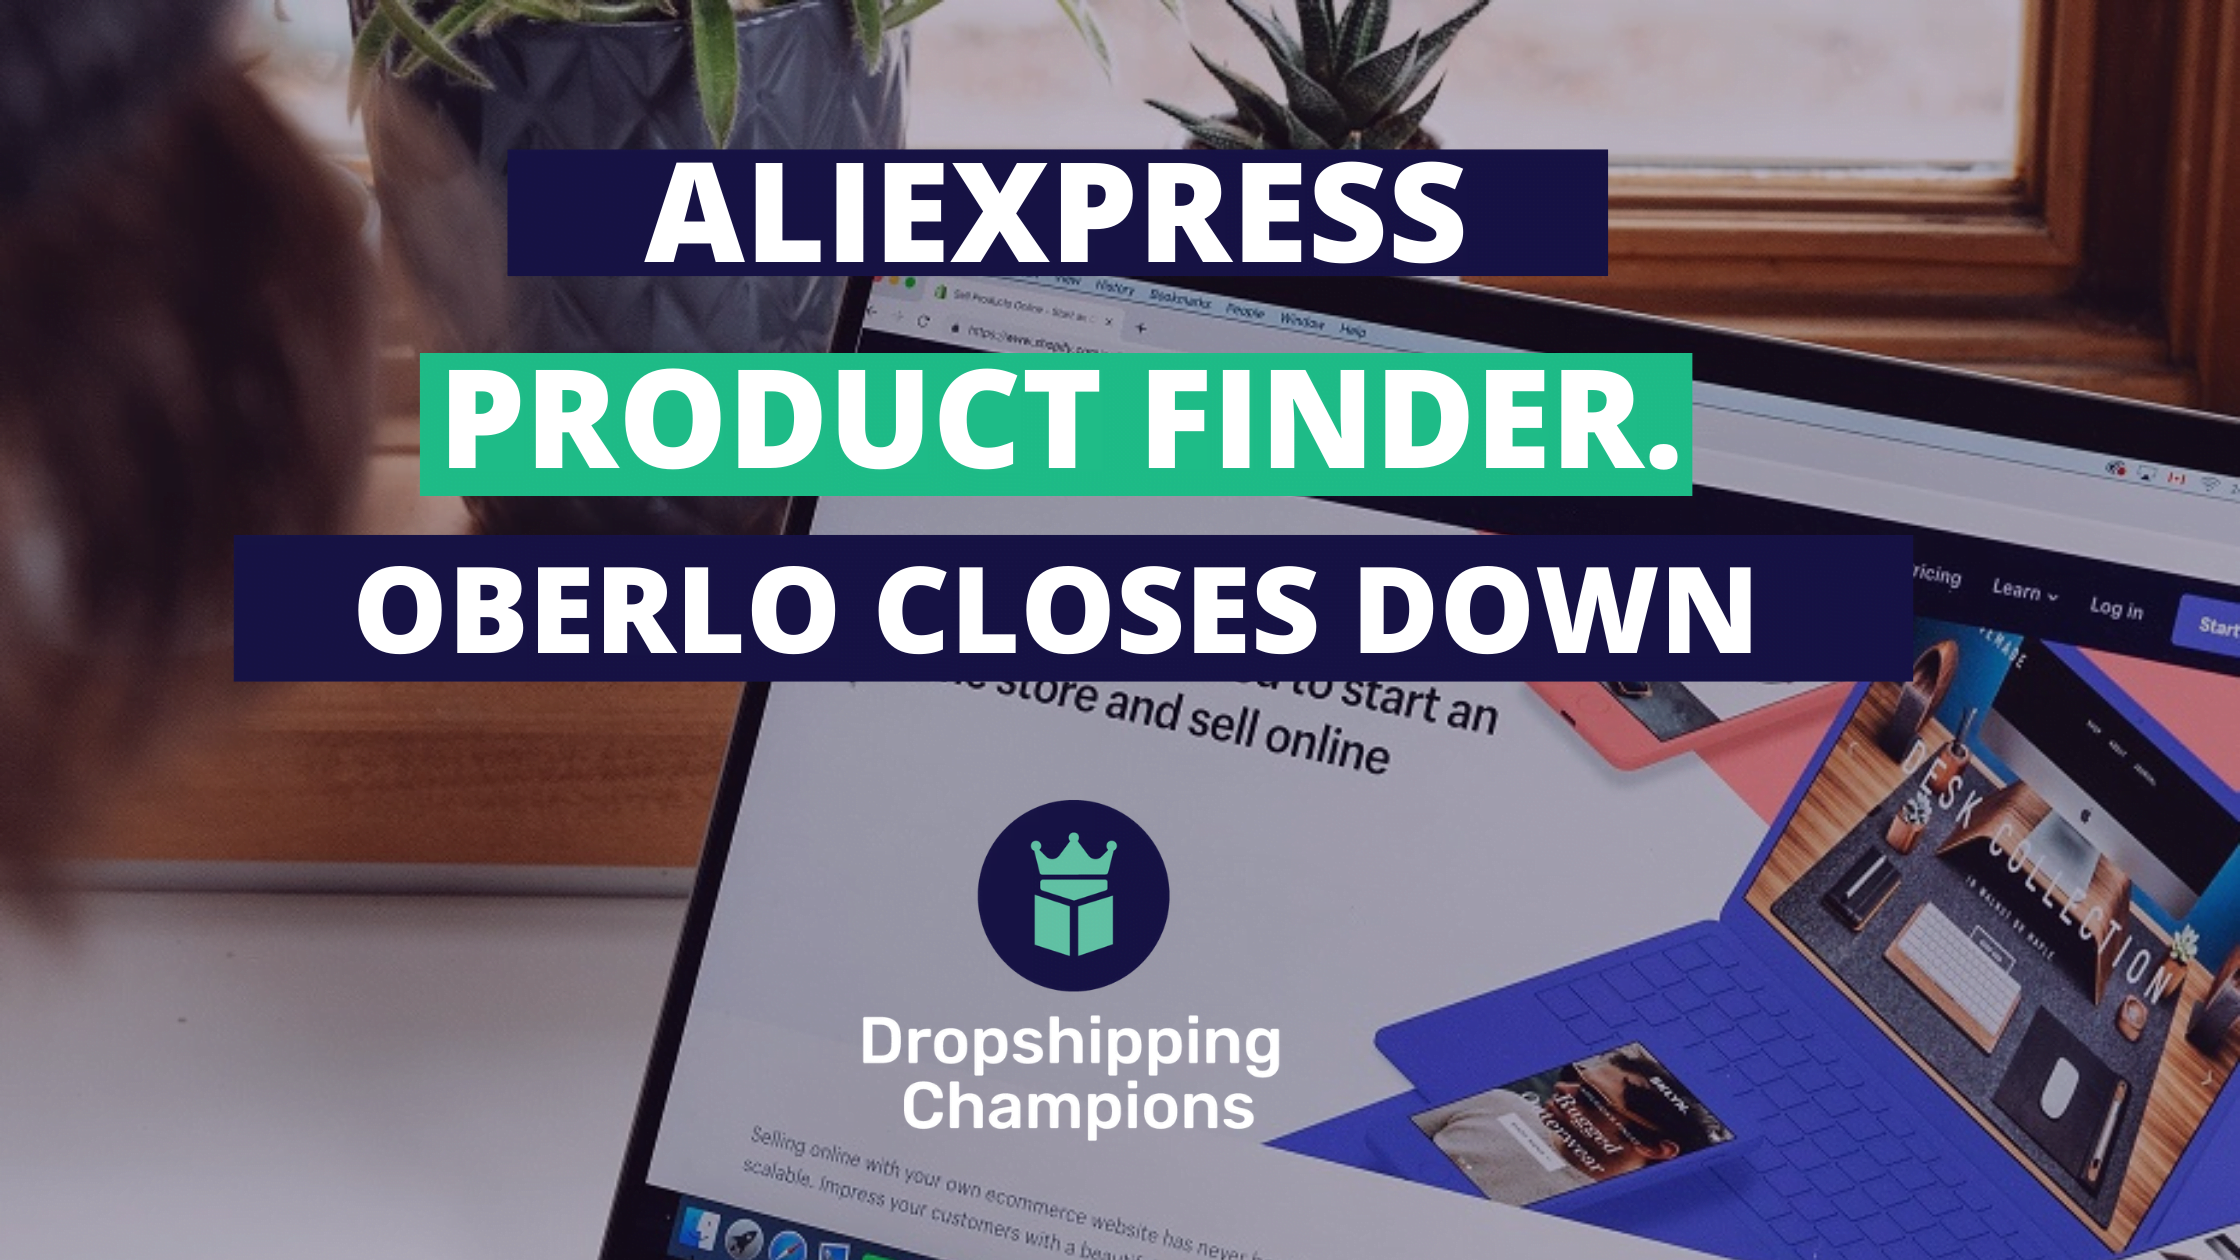 The Next Best Aliexpress Product Finder and Integration. Oberlo closes down.